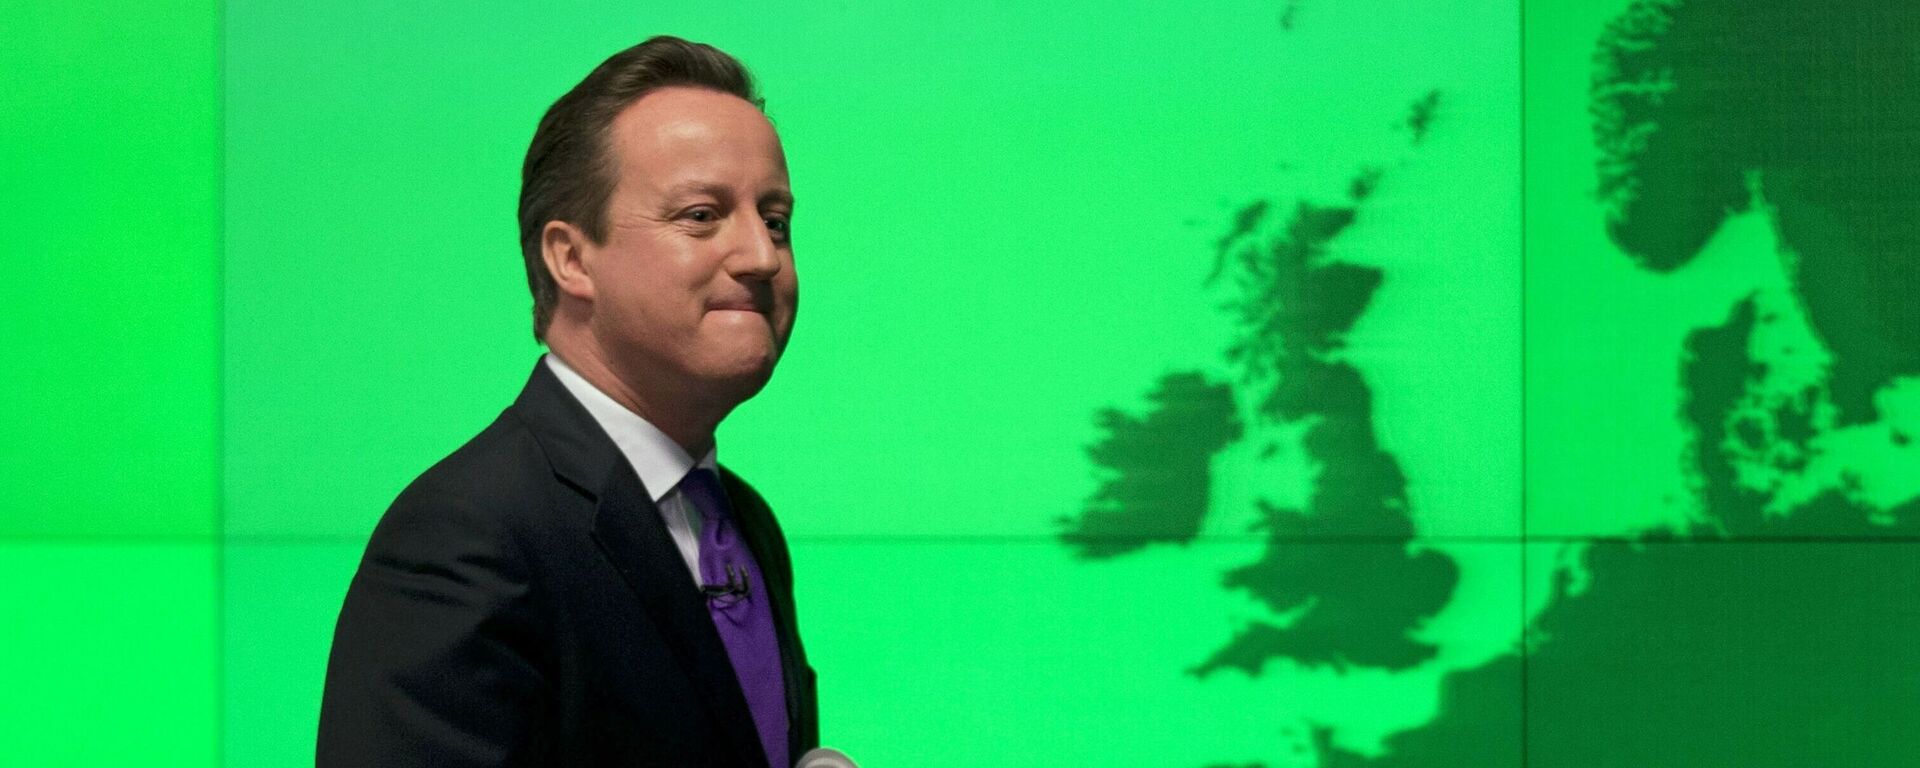 FILE - In this Wednesday, Jan. 23, 2013 file photo Britain's Prime Minister David Cameron walks past a map of Europe on a screen as he walks away after making a speech on holding a referendum on staying in the European Union in London. - Sputnik International, 1920, 25.02.2021